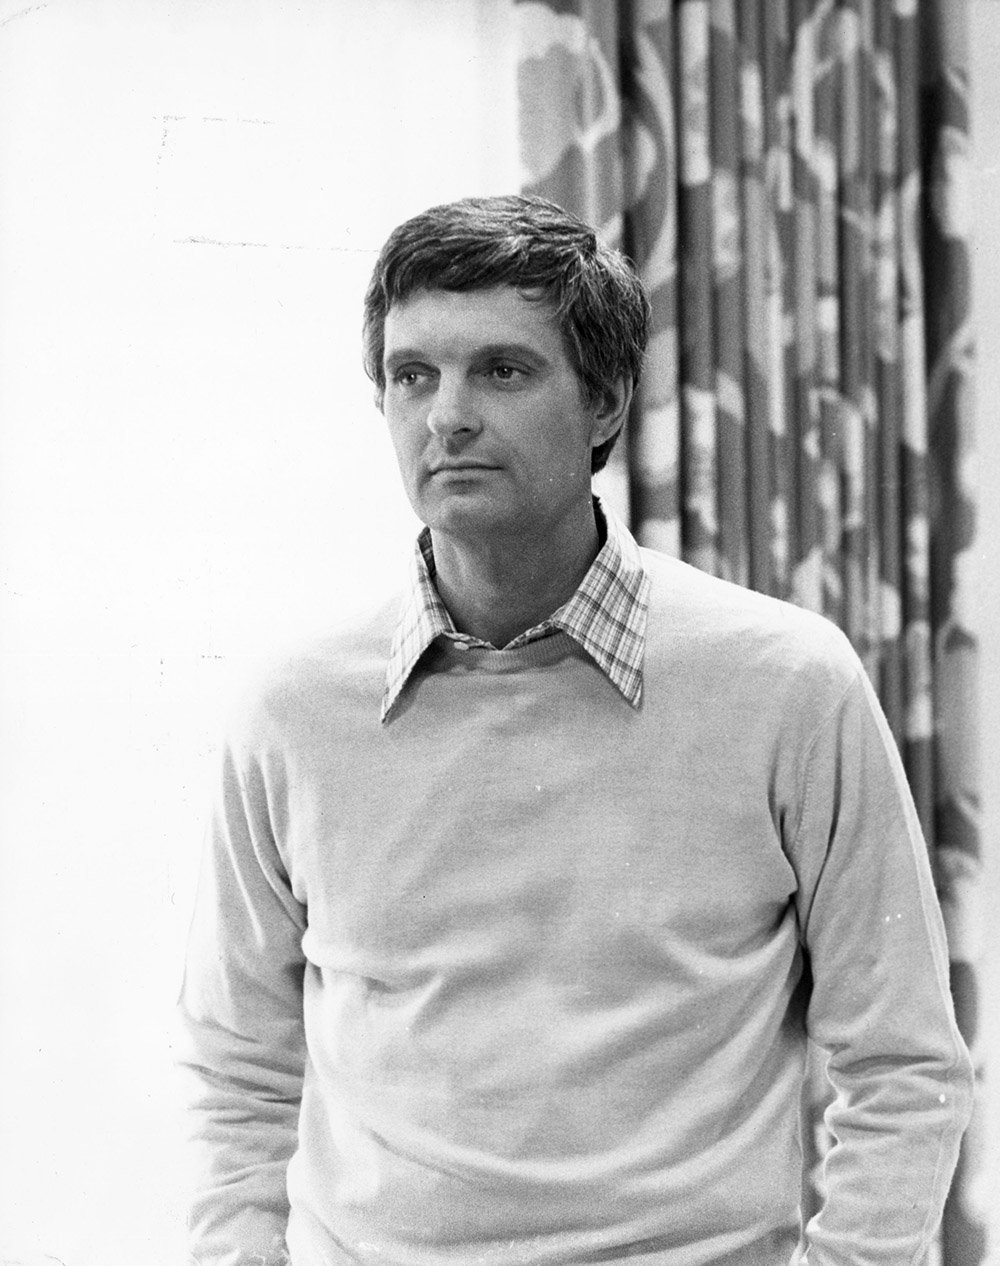 Alan Alda in his younger years. I Image: Getty Images.